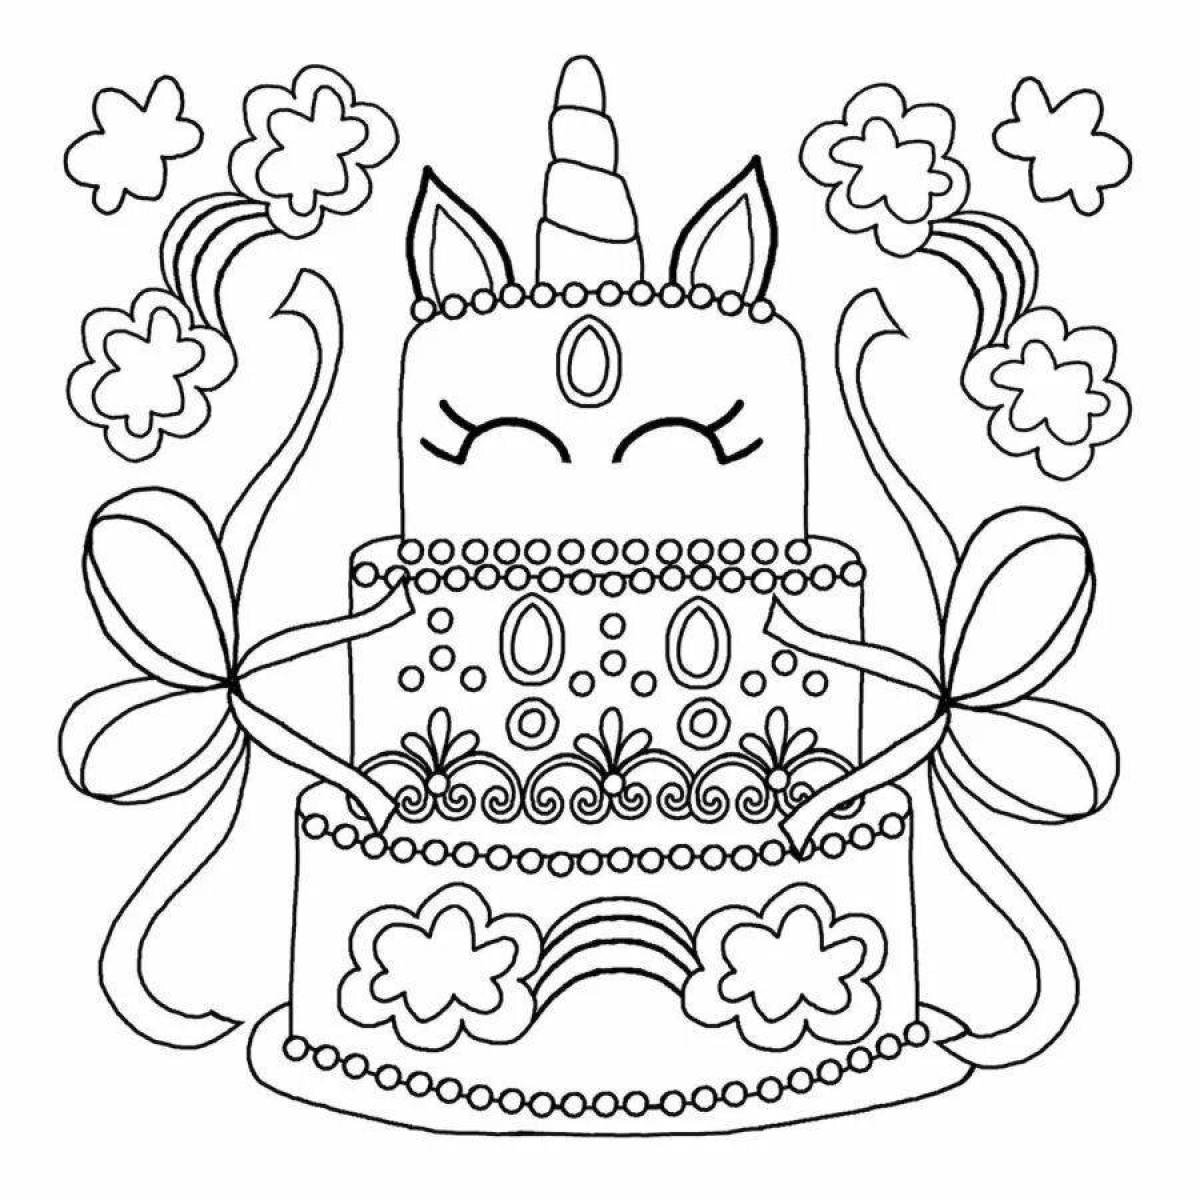 Dazzling 10th birthday coloring book